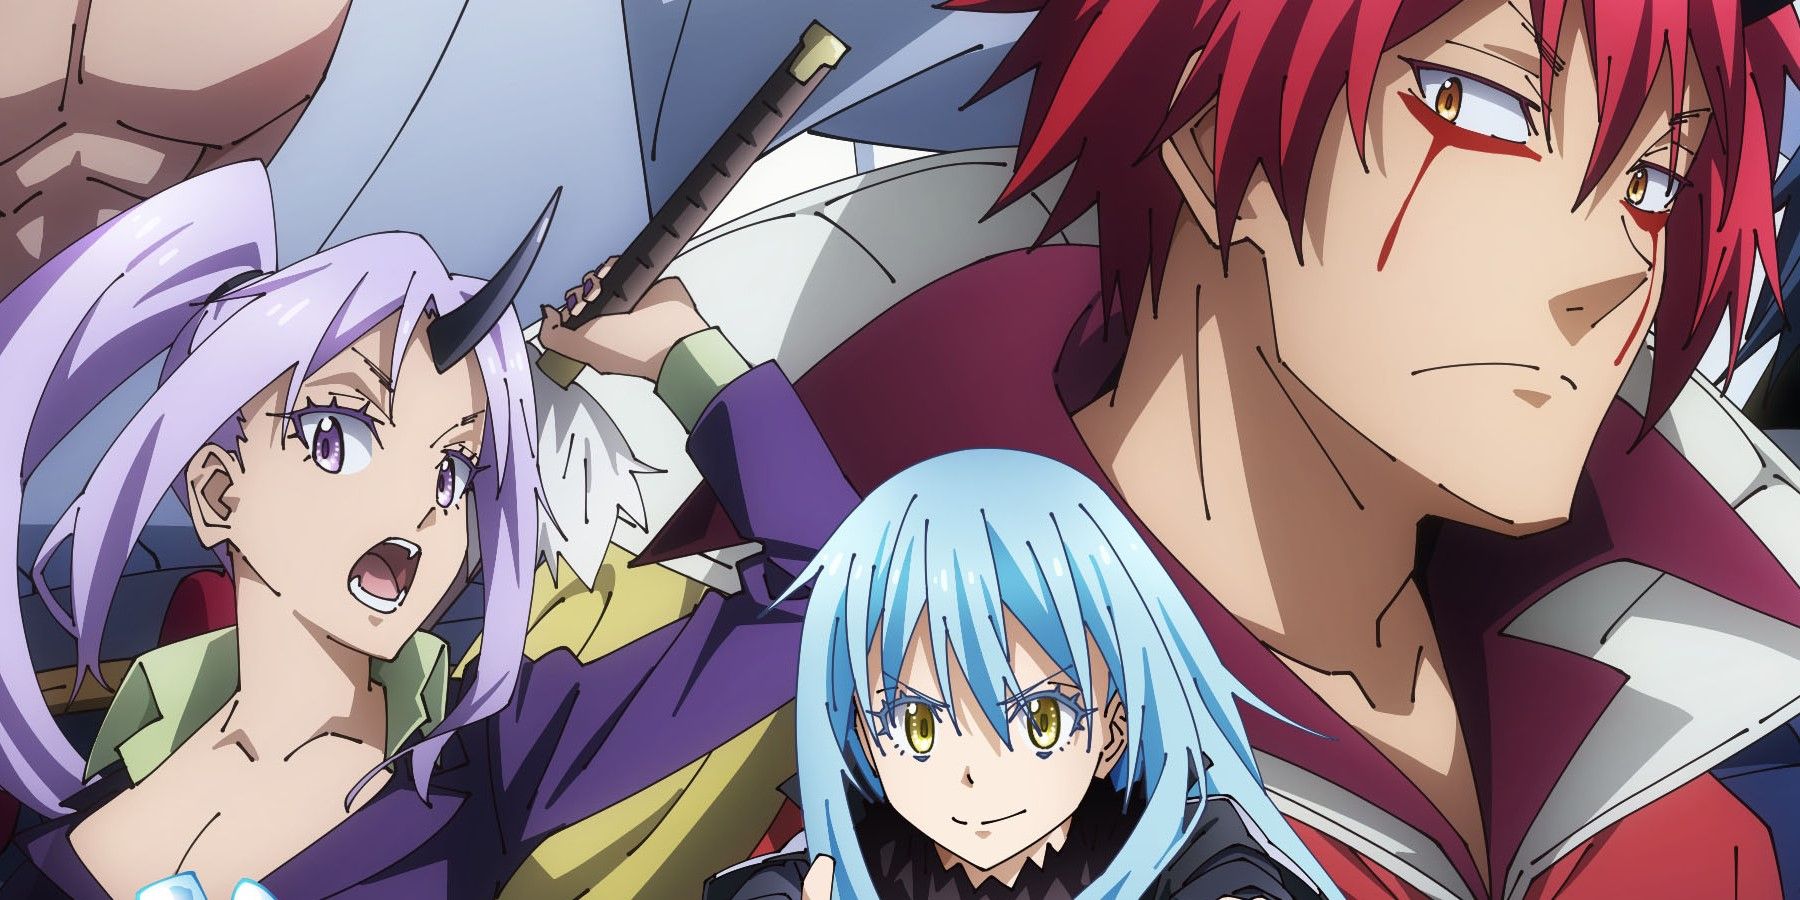 Fall 2022 Preview: That Time I Got Reincarnated as a Slime: The